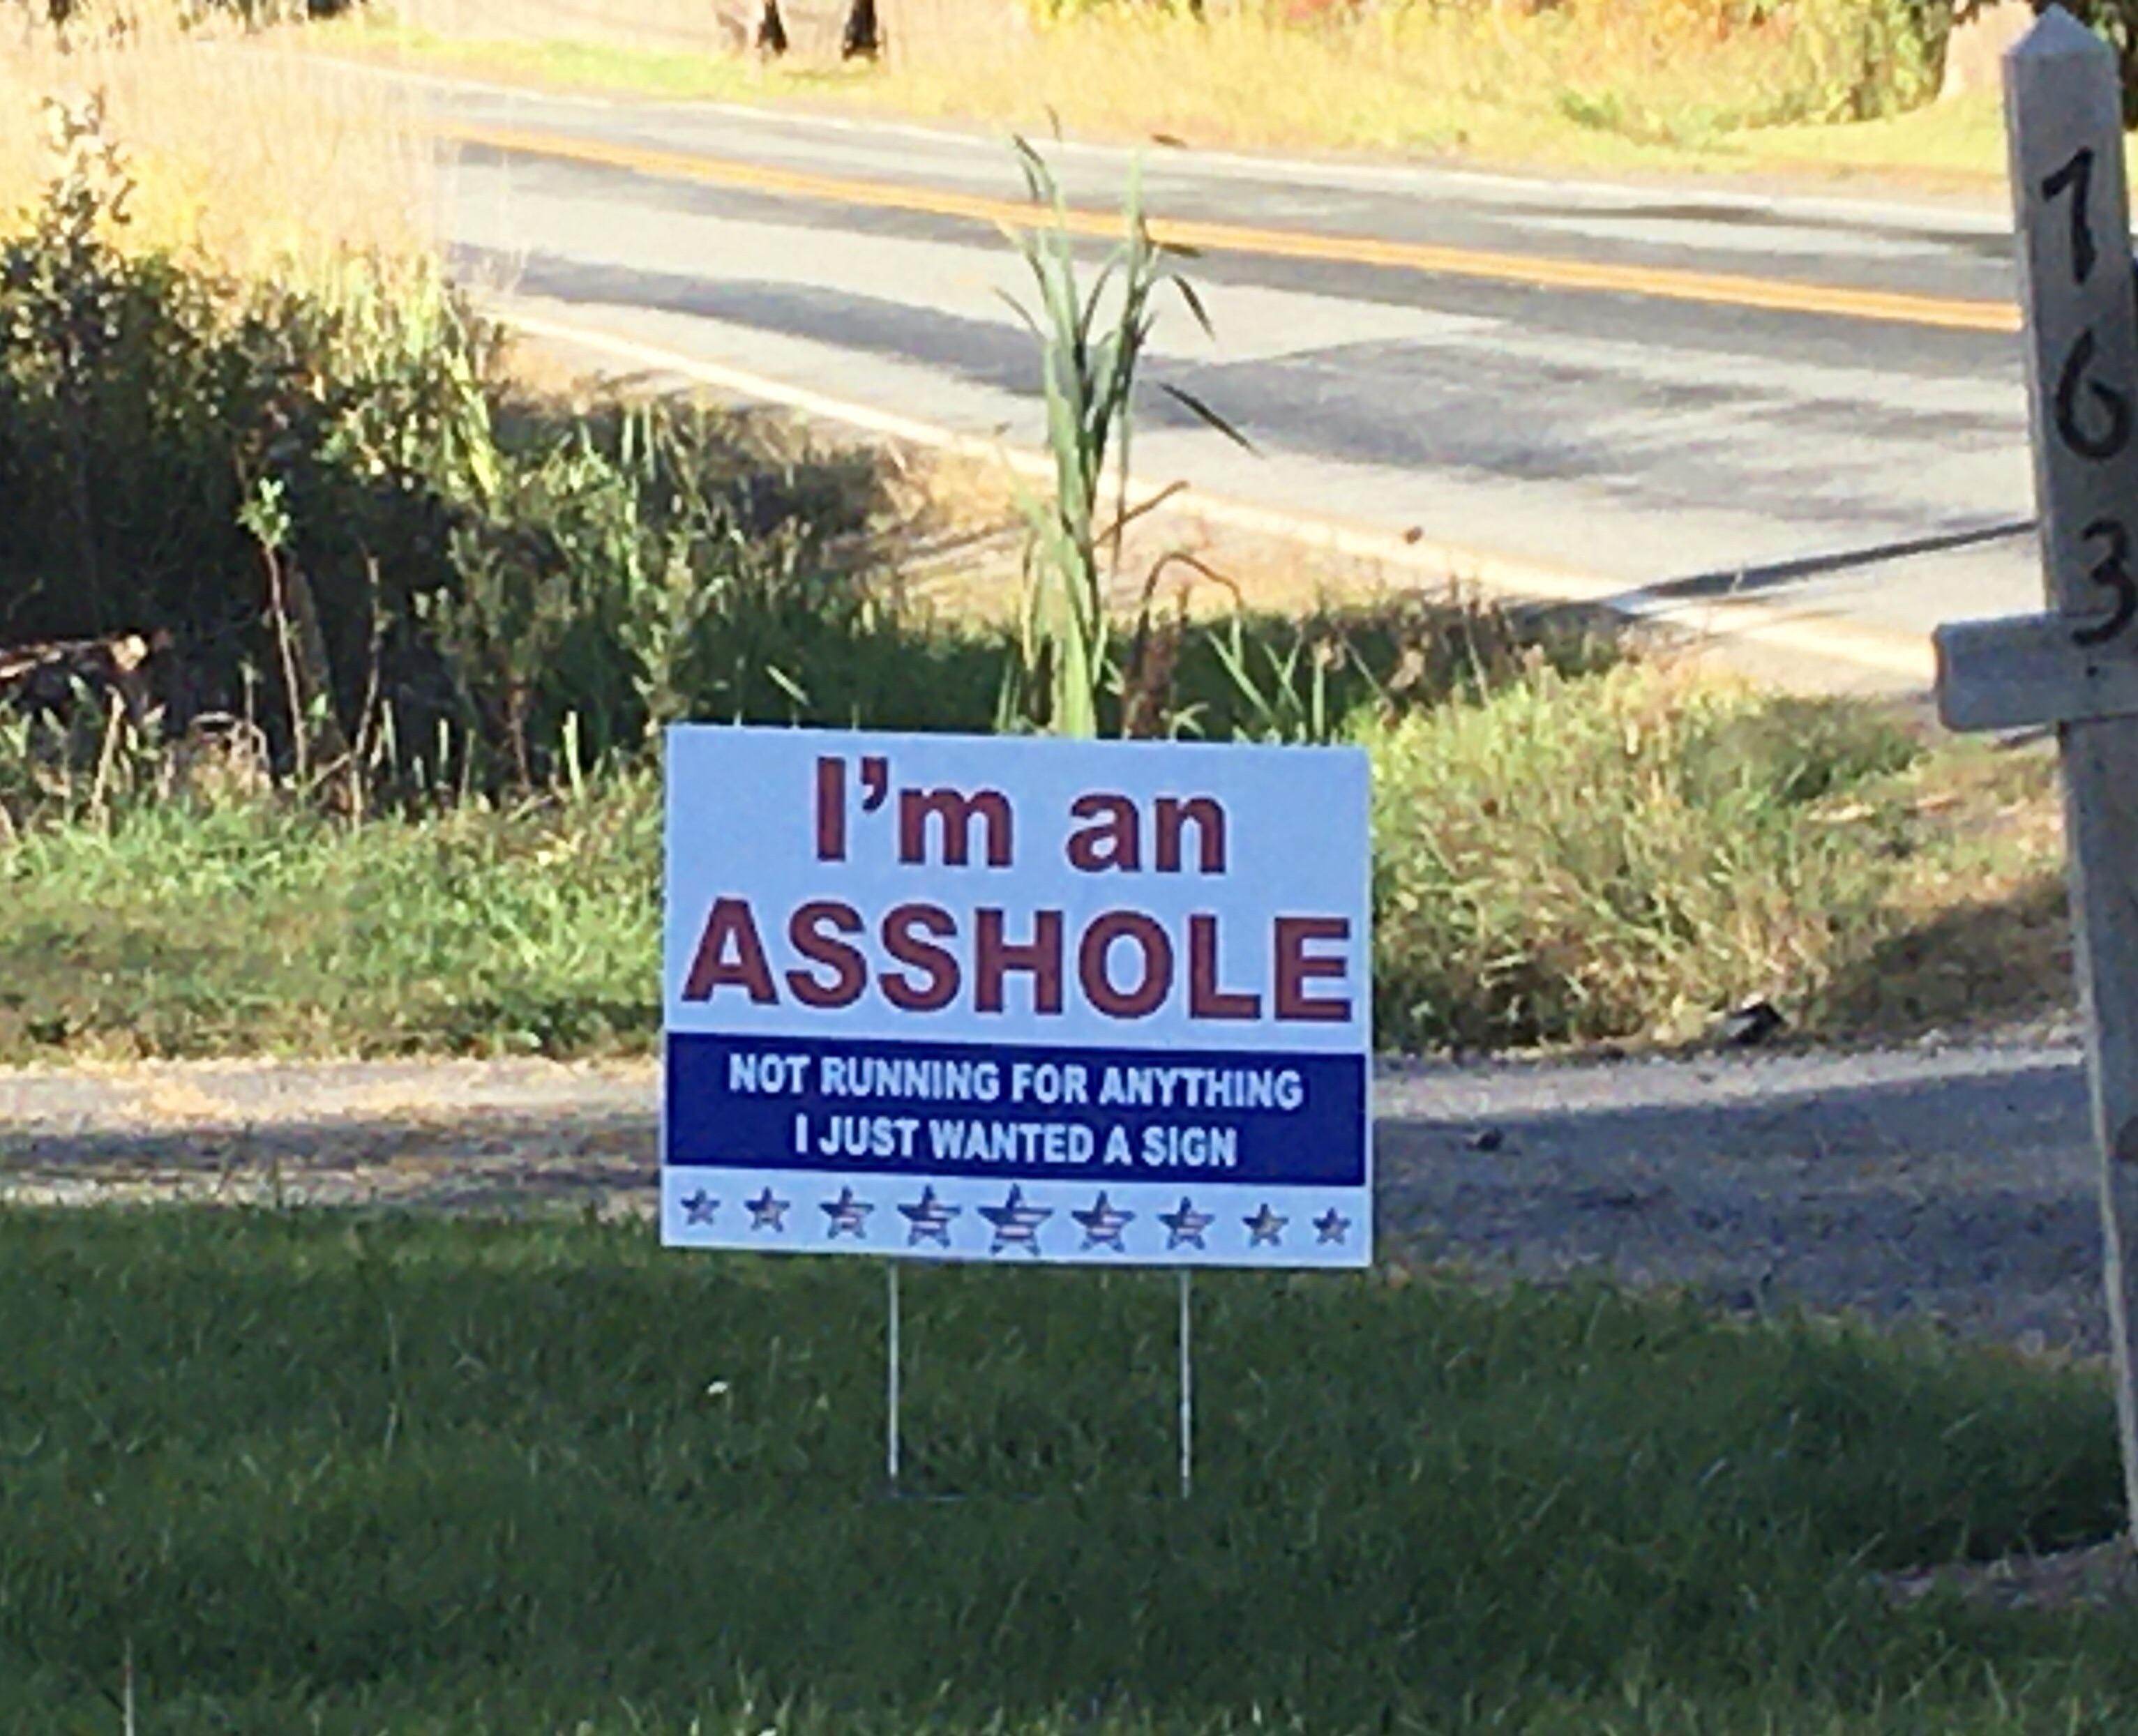 Saw this yard sign today in PA. I need one!